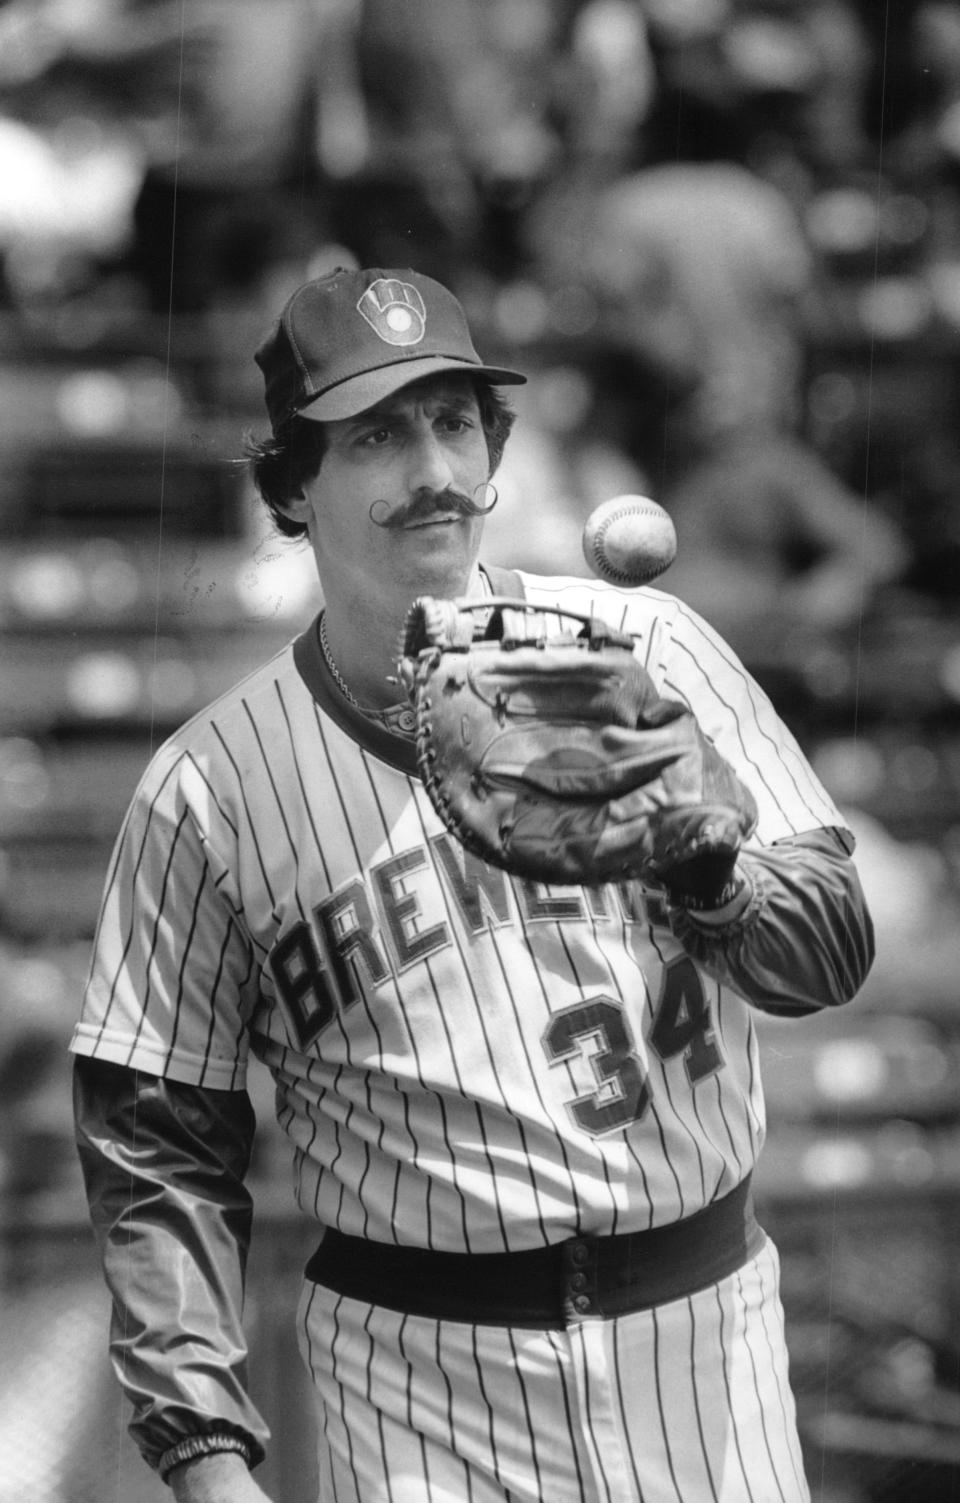 Rollie Fingers was inducted into the Walk of Fame in 2001.